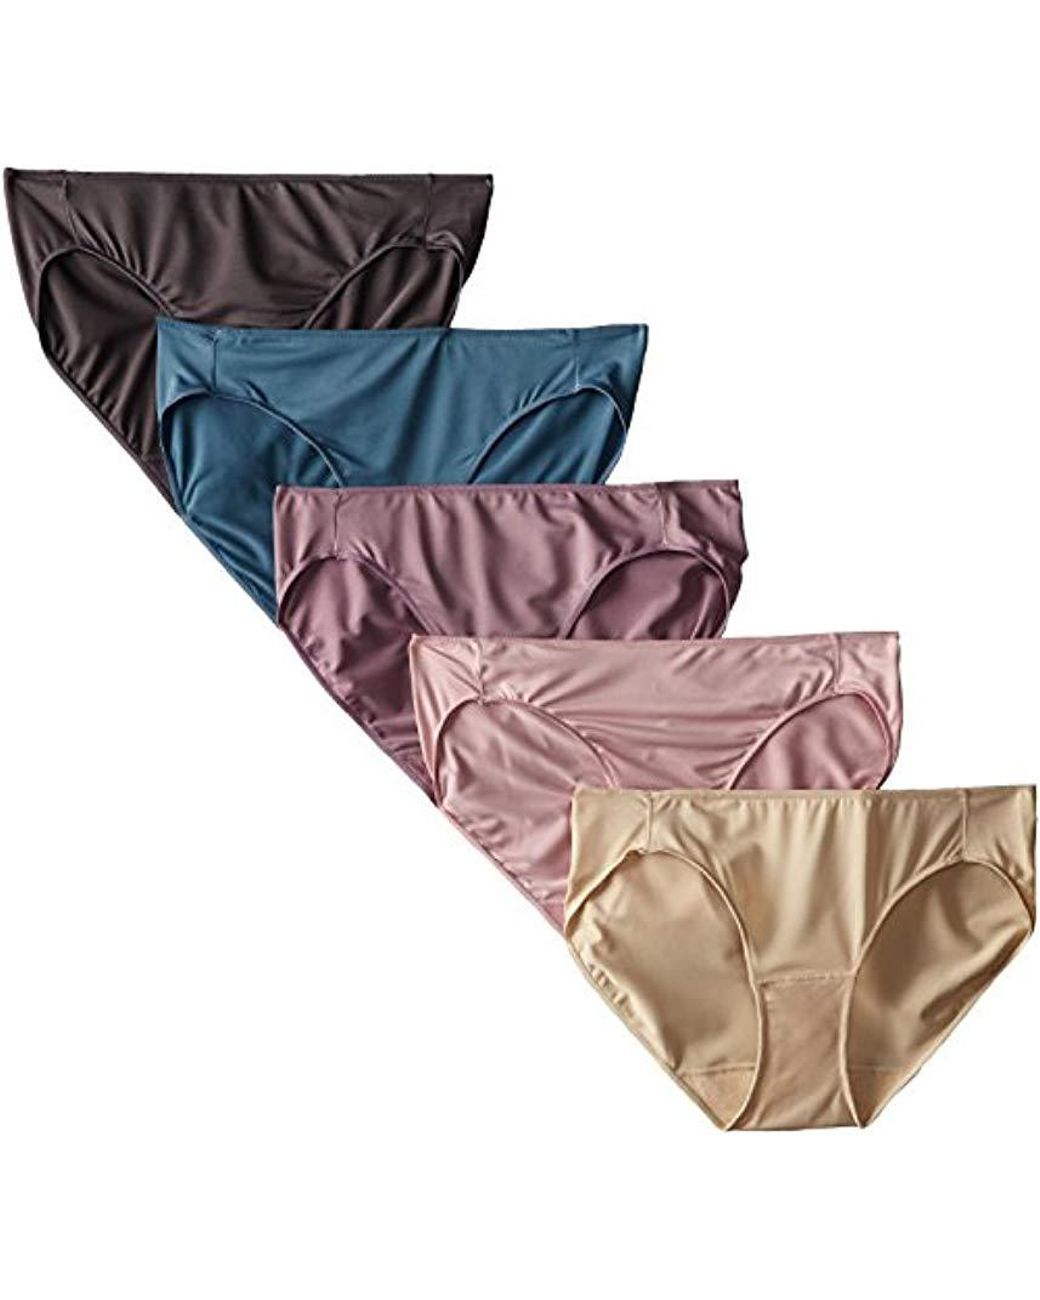 Hanes Womens Cool Comfort Microfiber Sporty Bikinis 6-Pack, 5, Assorted at   Women's Clothing store